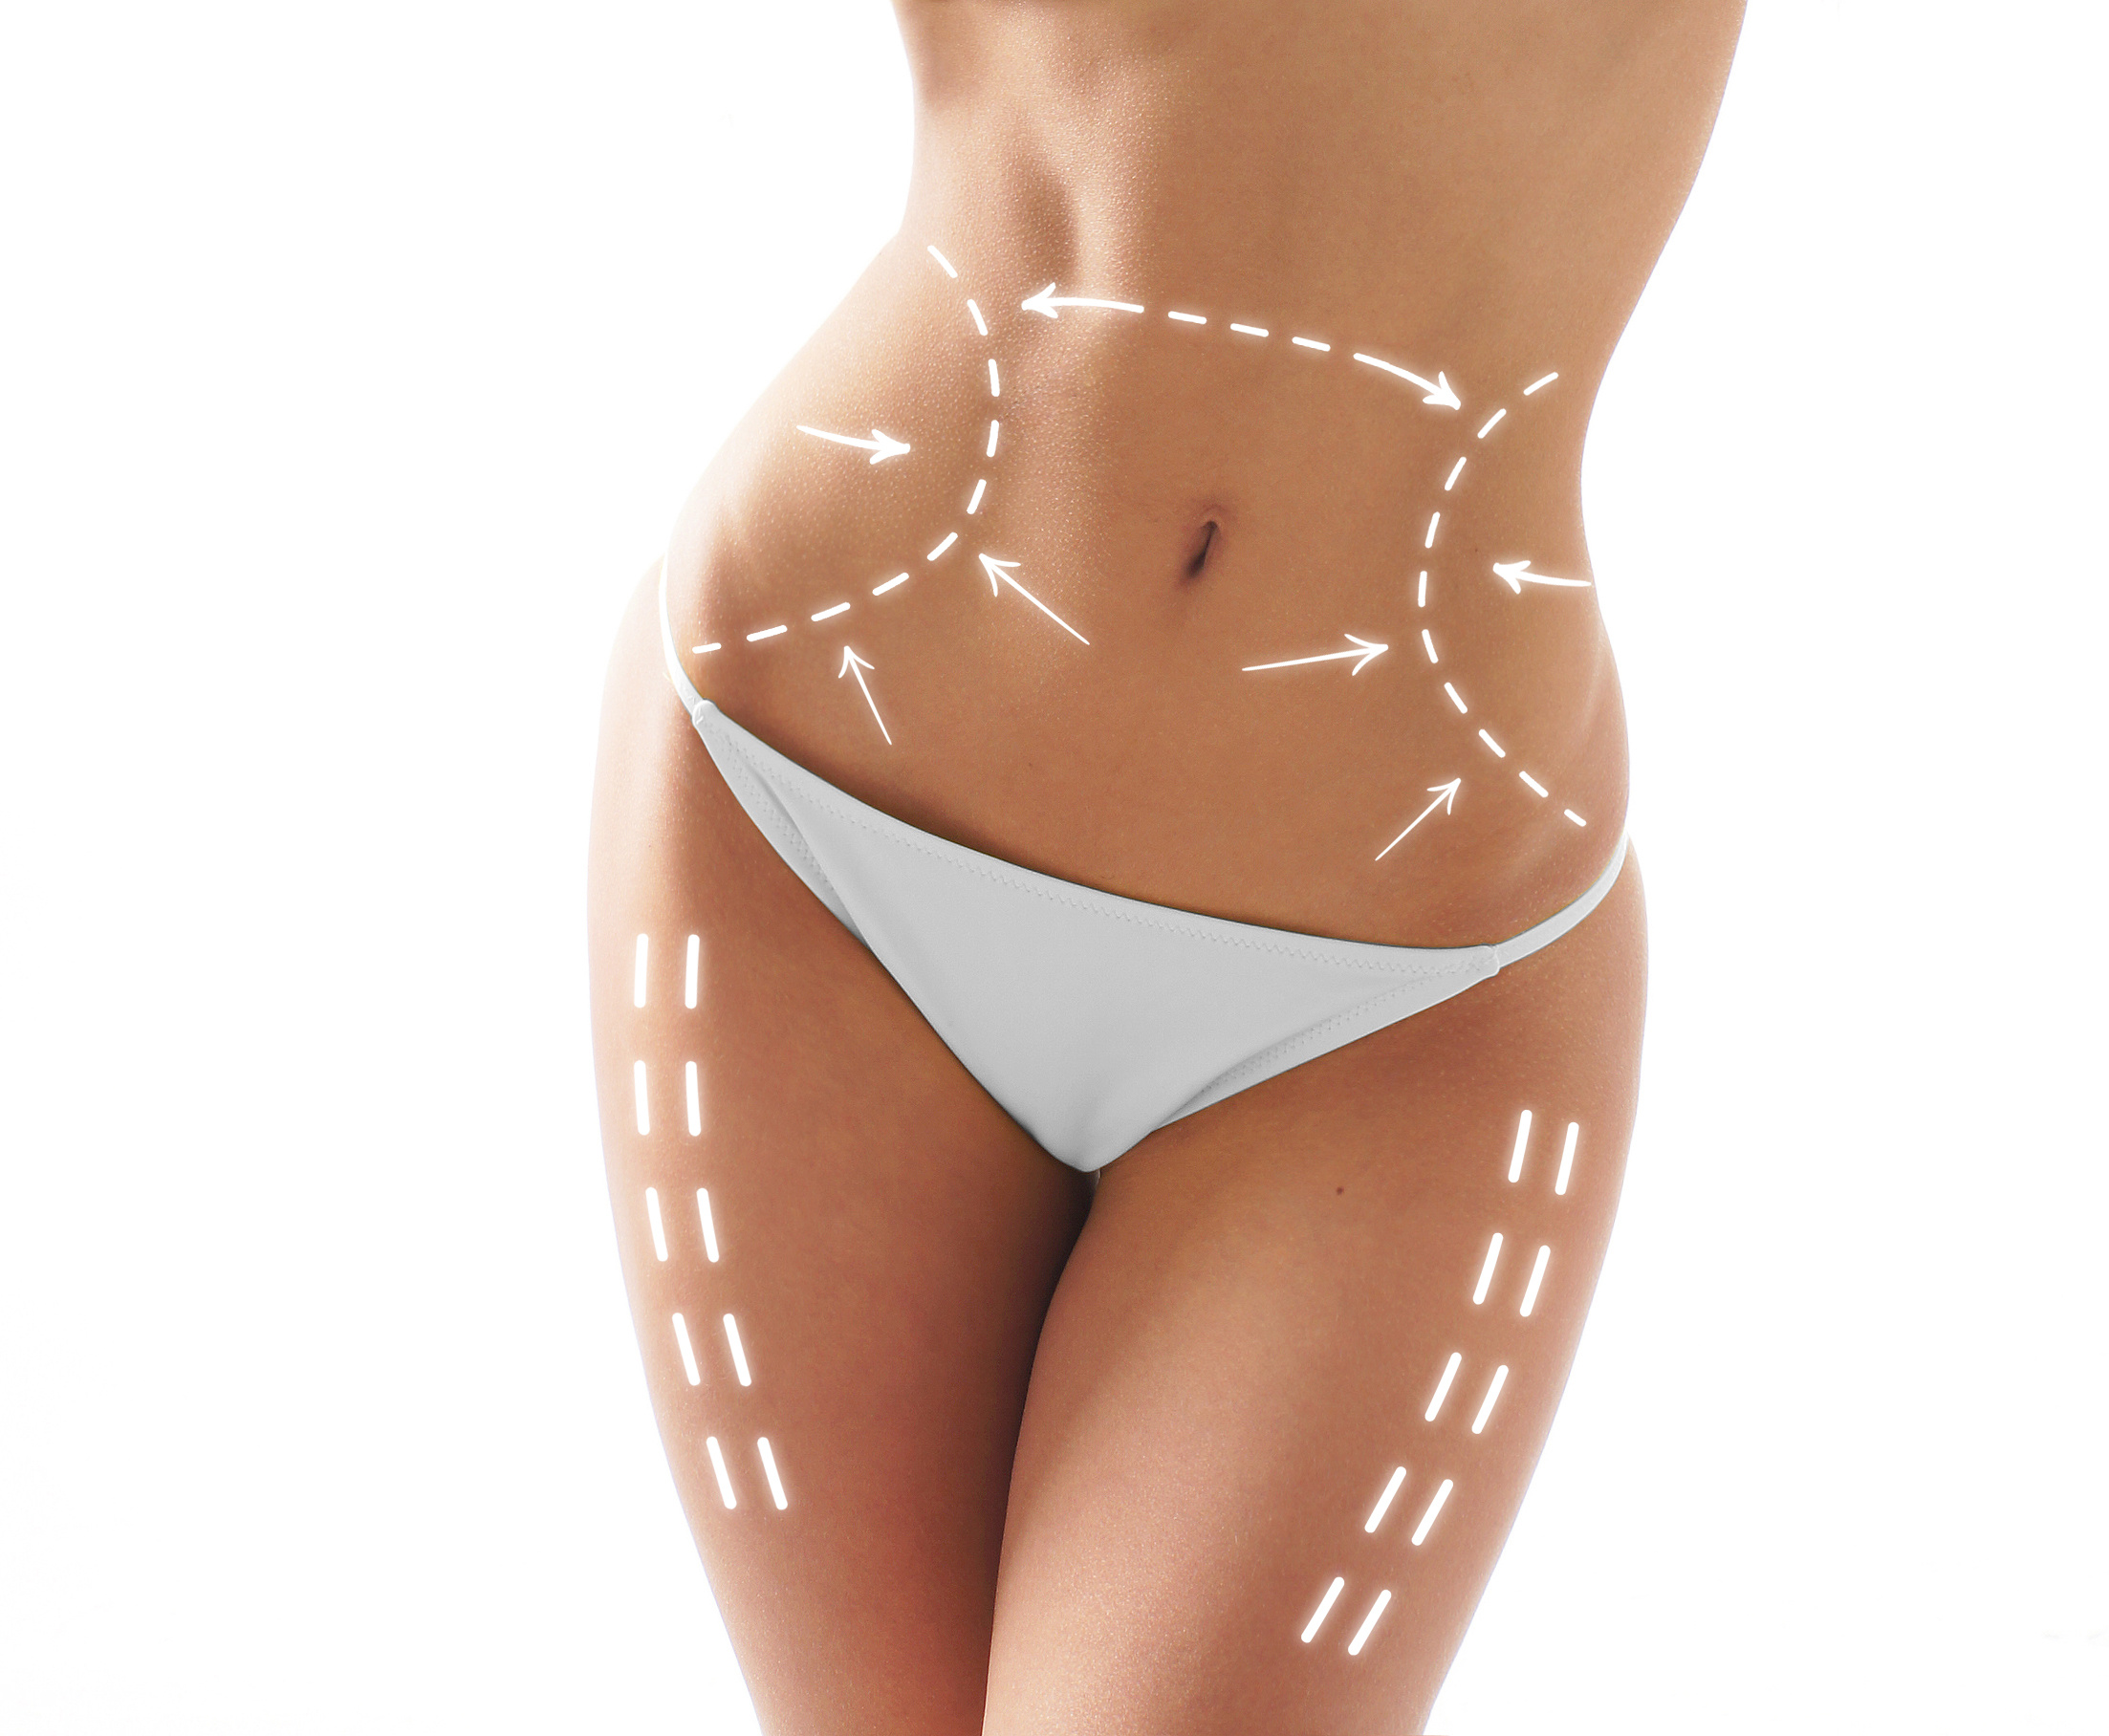 Female body with the drawing arrows on it isolated on white. Fat lose, liposuction and cellulite removal concept.